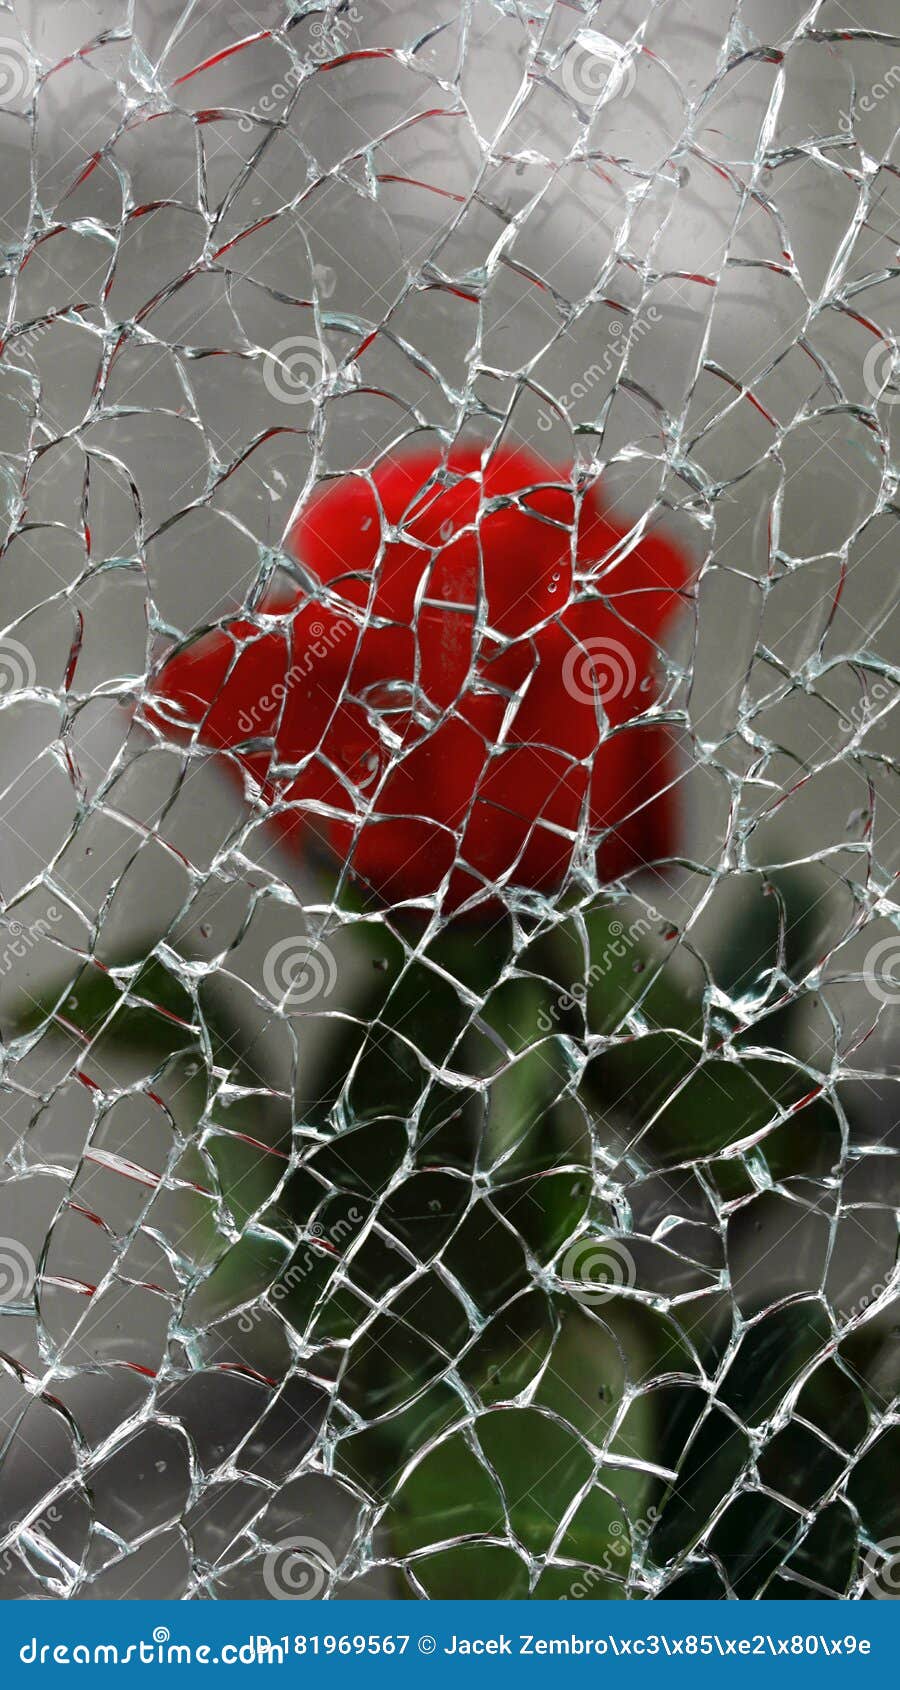 A Red Rose Behind Broken Glass Stock Image - Image of glassn, glass:  181969567